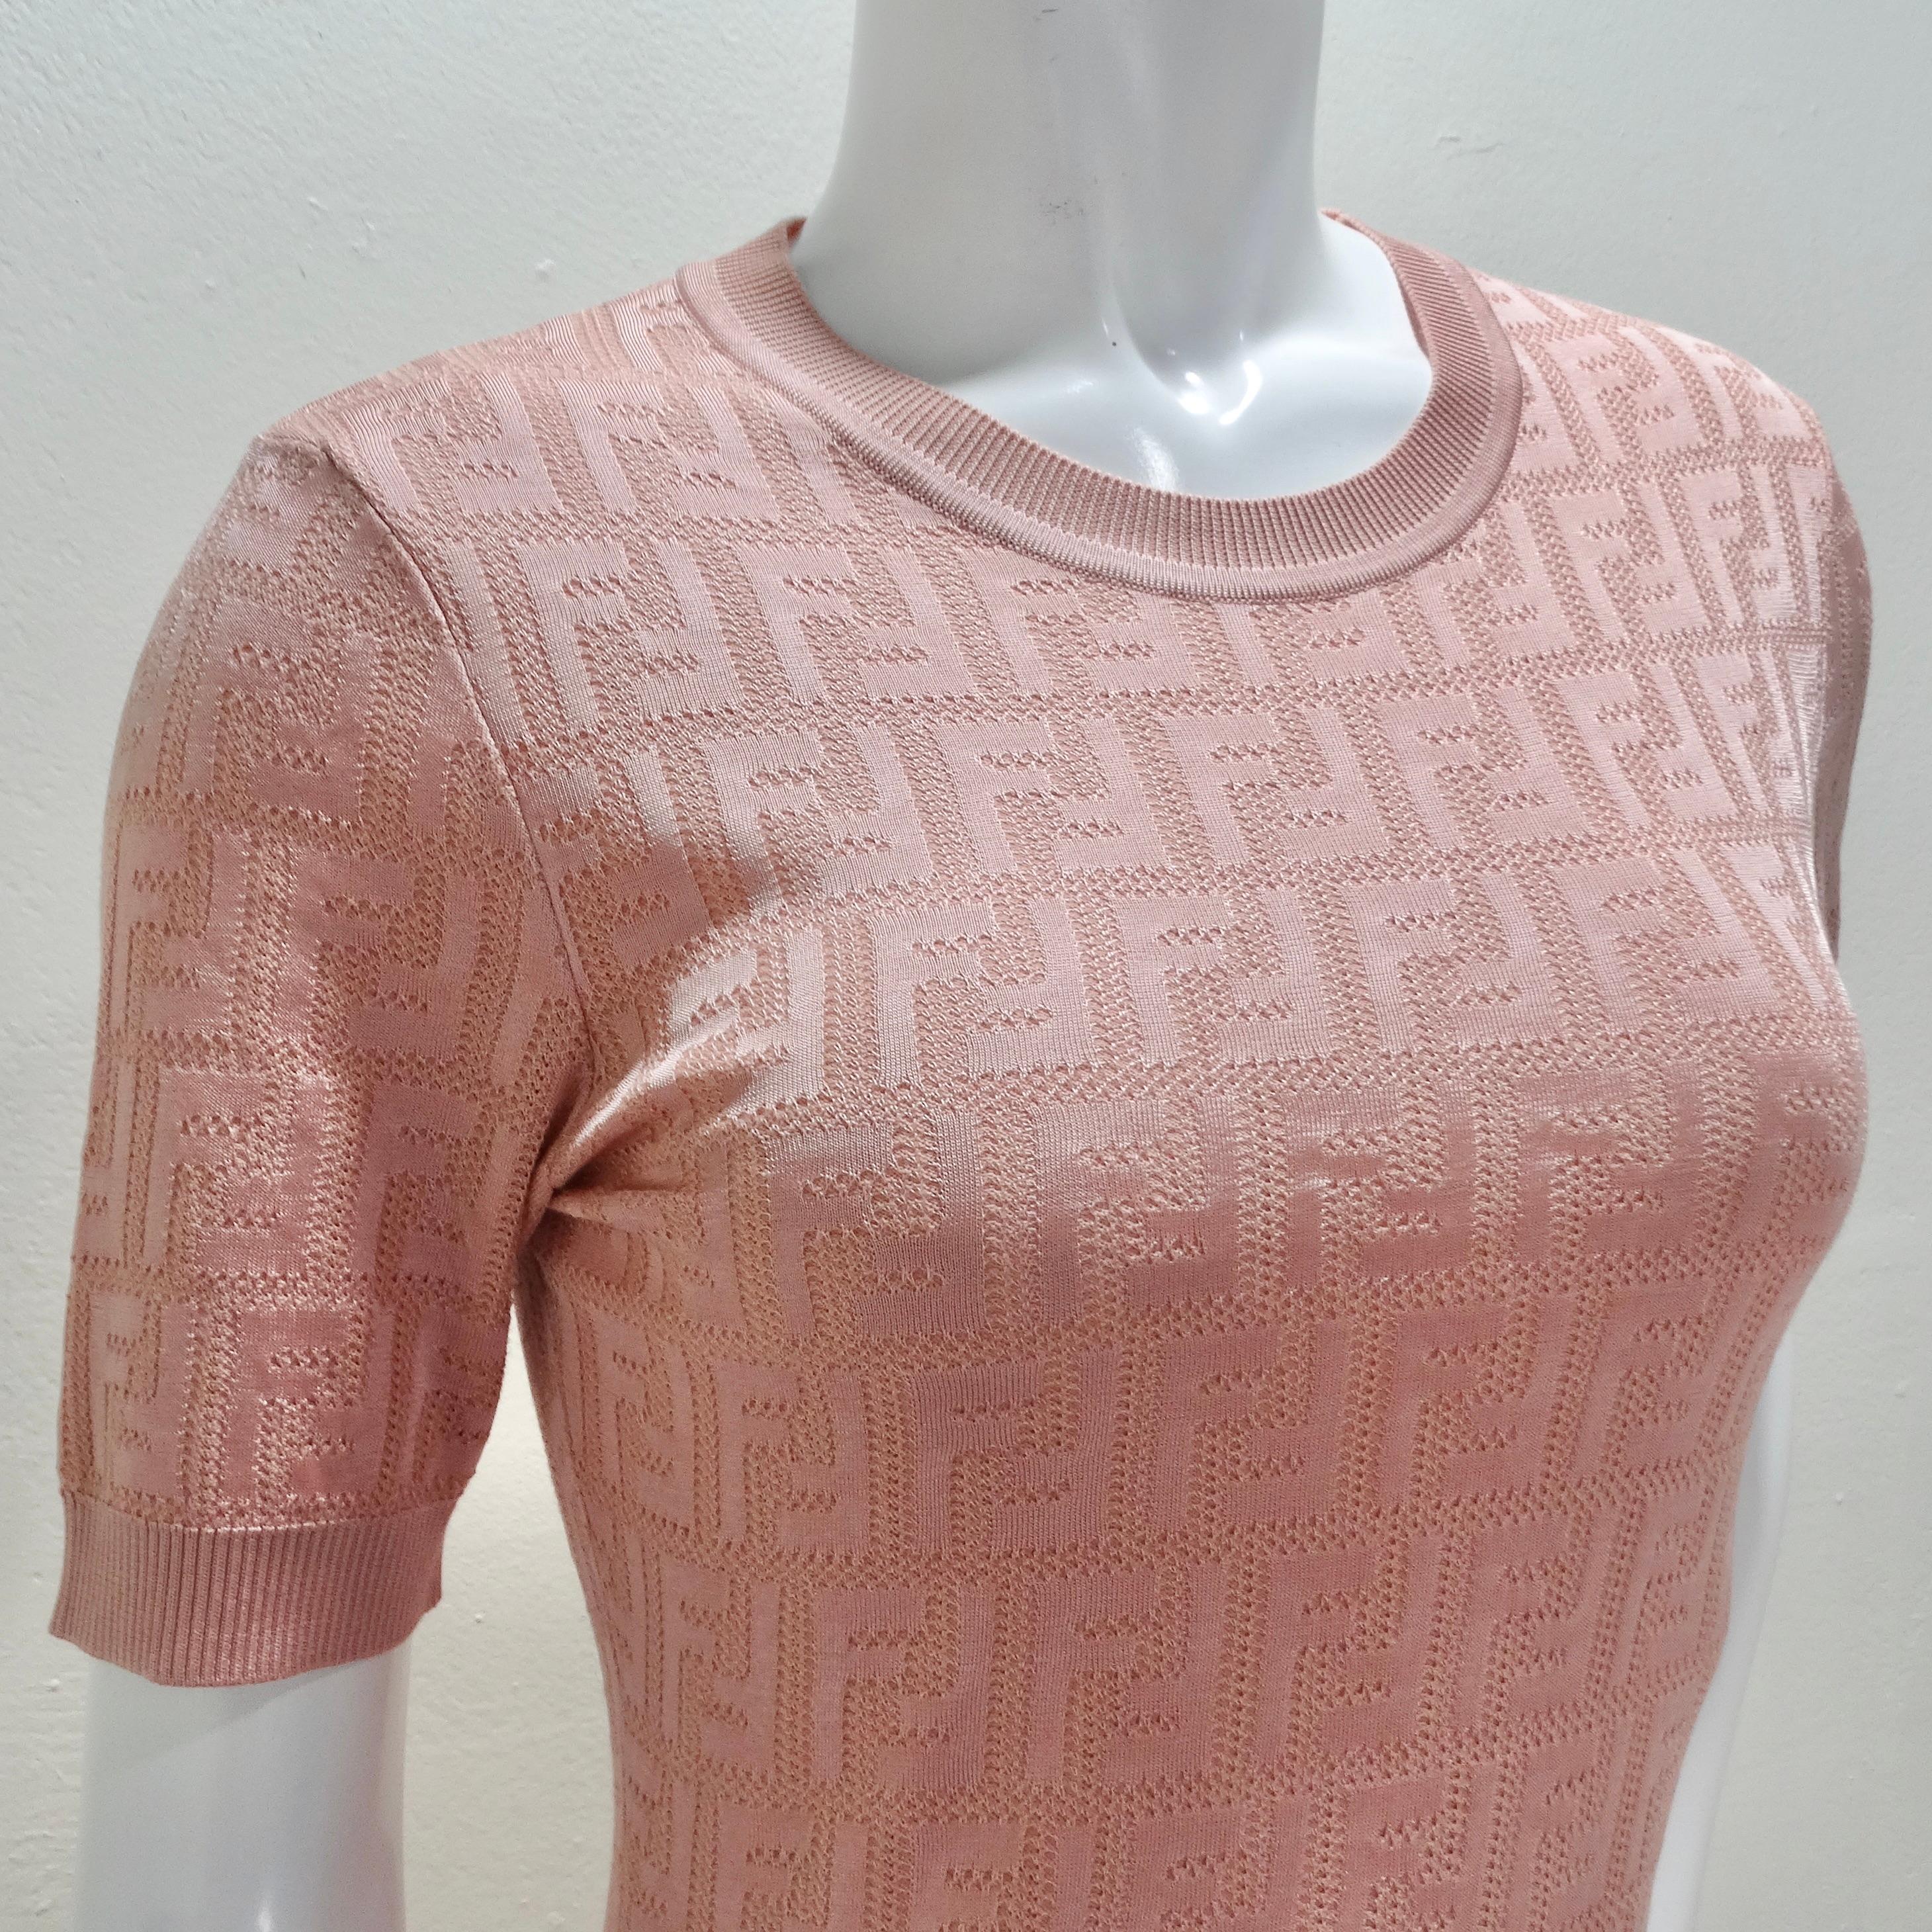 Introducing the Fendi Pink Jacquard Monogram Crewneck Dress, a stunning piece that combines classic elegance with modern sophistication. Crafted from a luxurious jacquard cotton blend, this lightweight knitted dress features a timeless crewneck